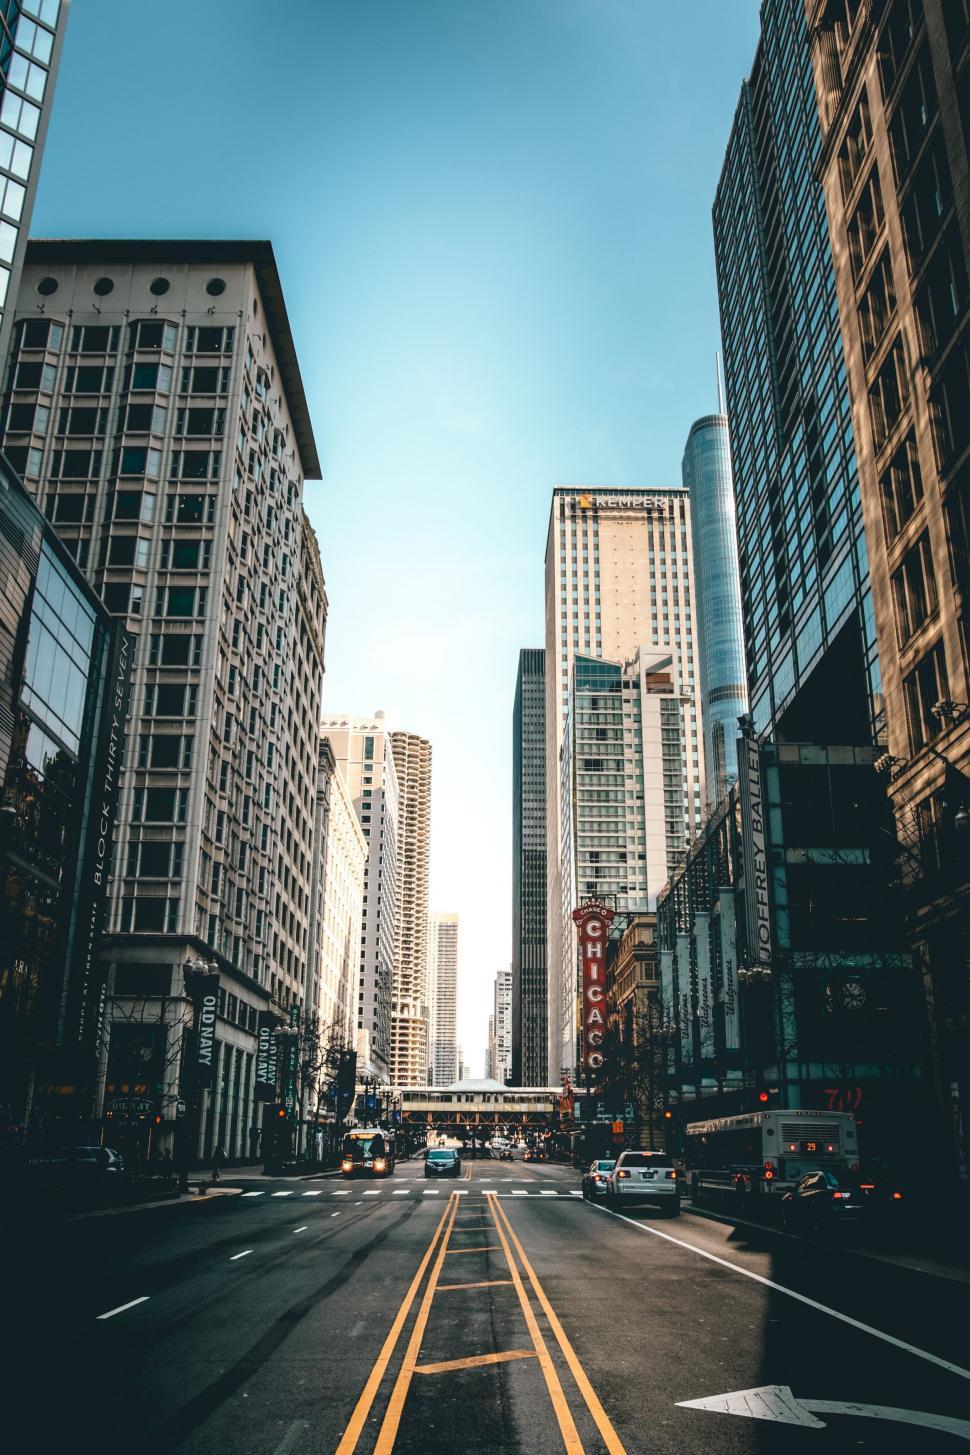 Free Image of Bustling City Street With Tall Buildings and Traffic 